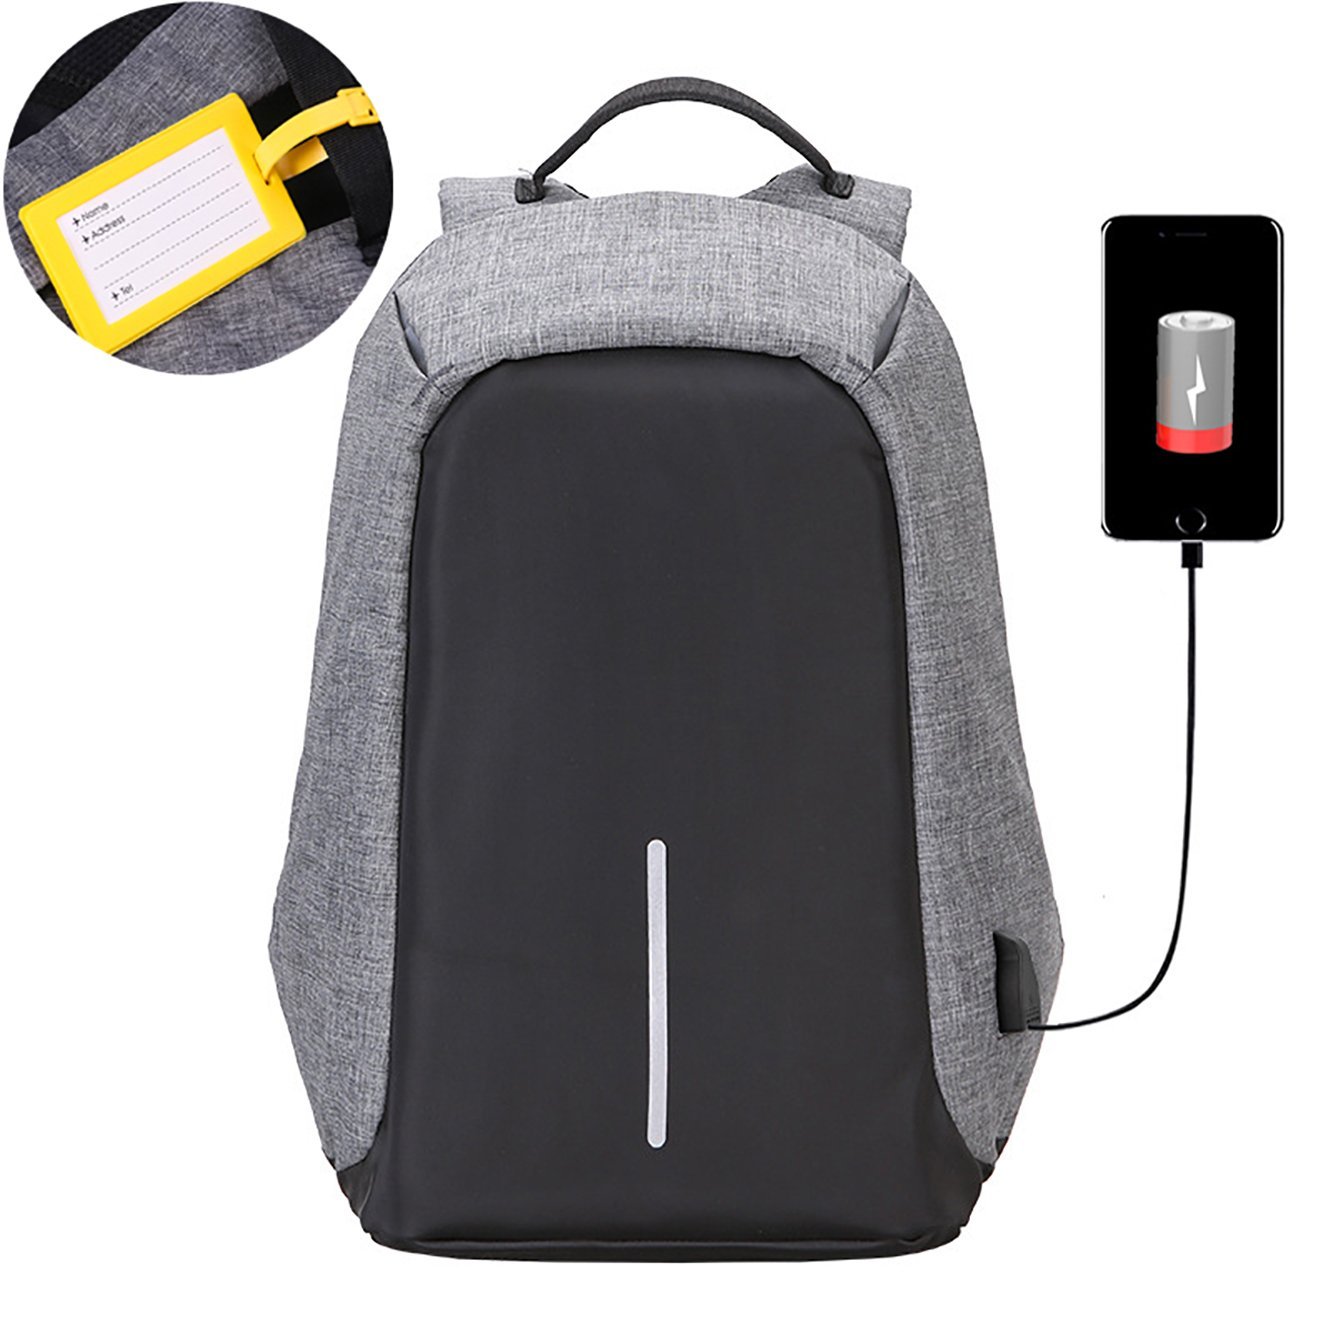 levis backpack anti theft